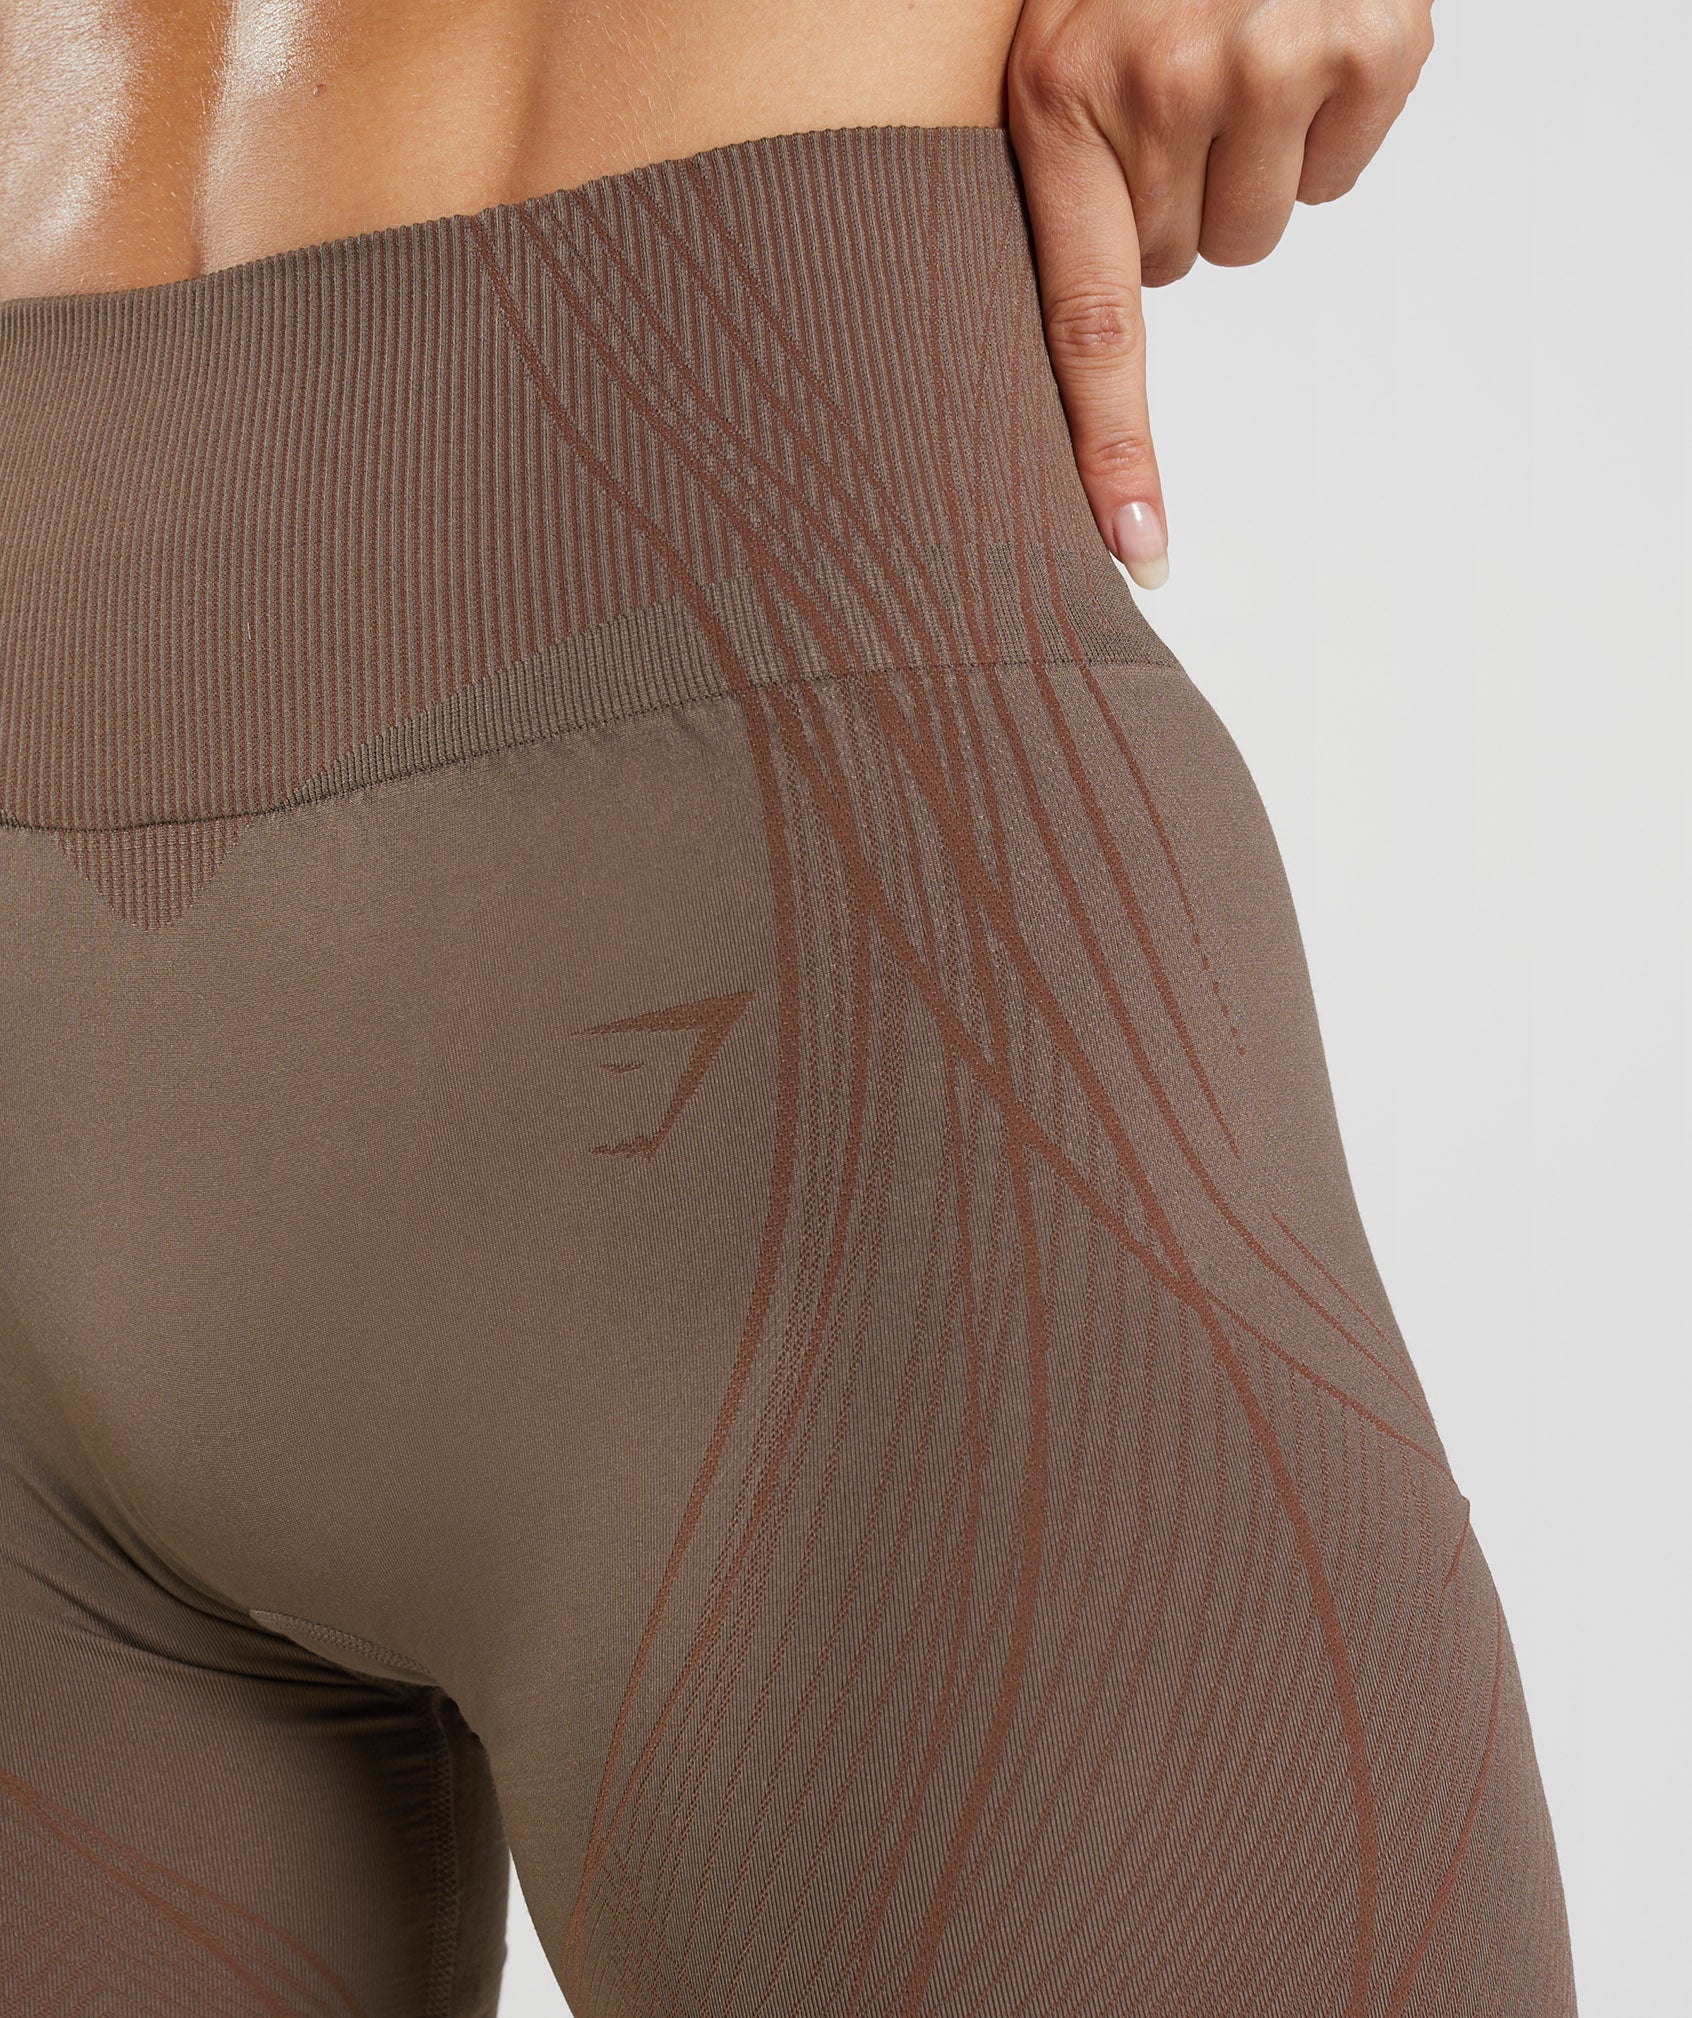 Apex Seamless Shorts in Truffle Brown/Cherry Brown - view 5